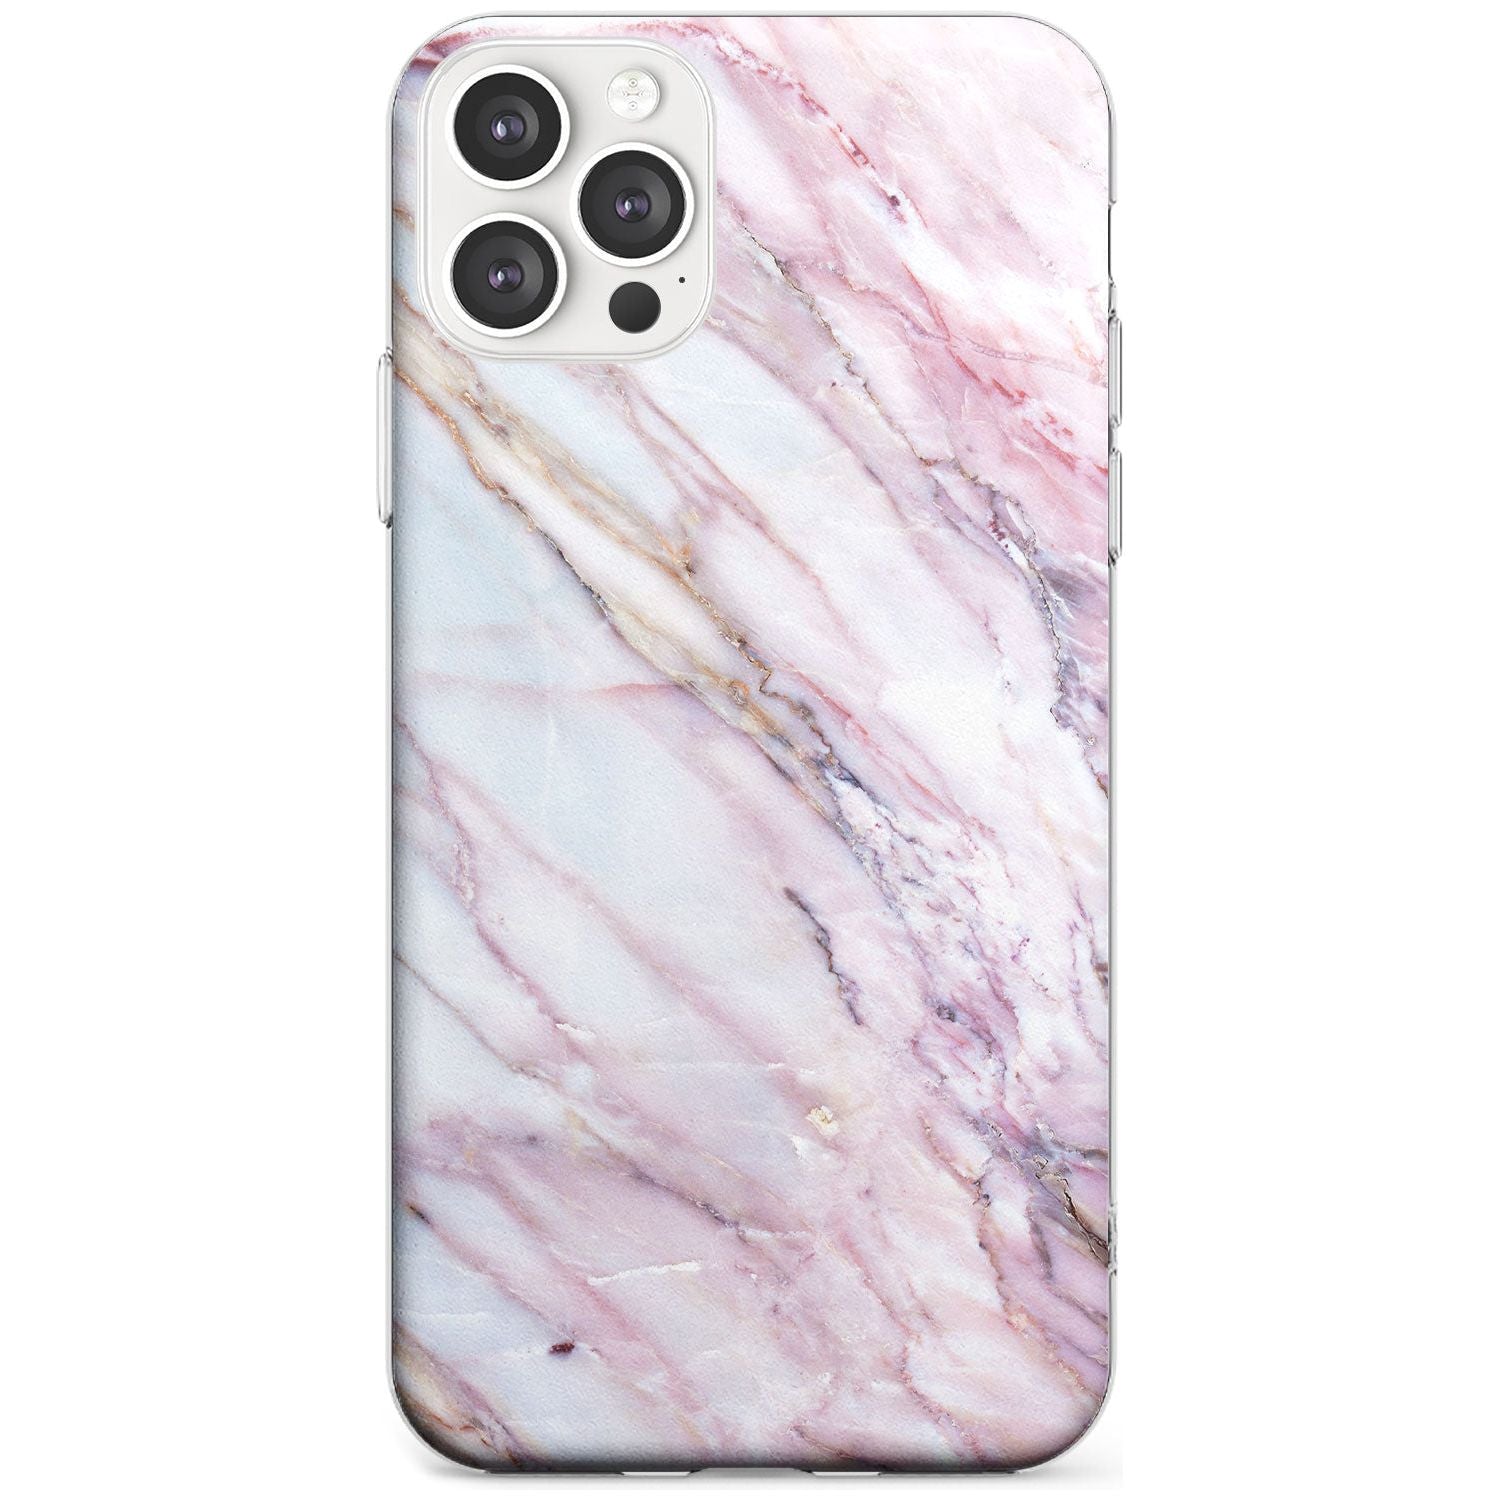 White, Pink & Purple Onyx Marble Texture Black Impact Phone Case for iPhone 11 Pro Max